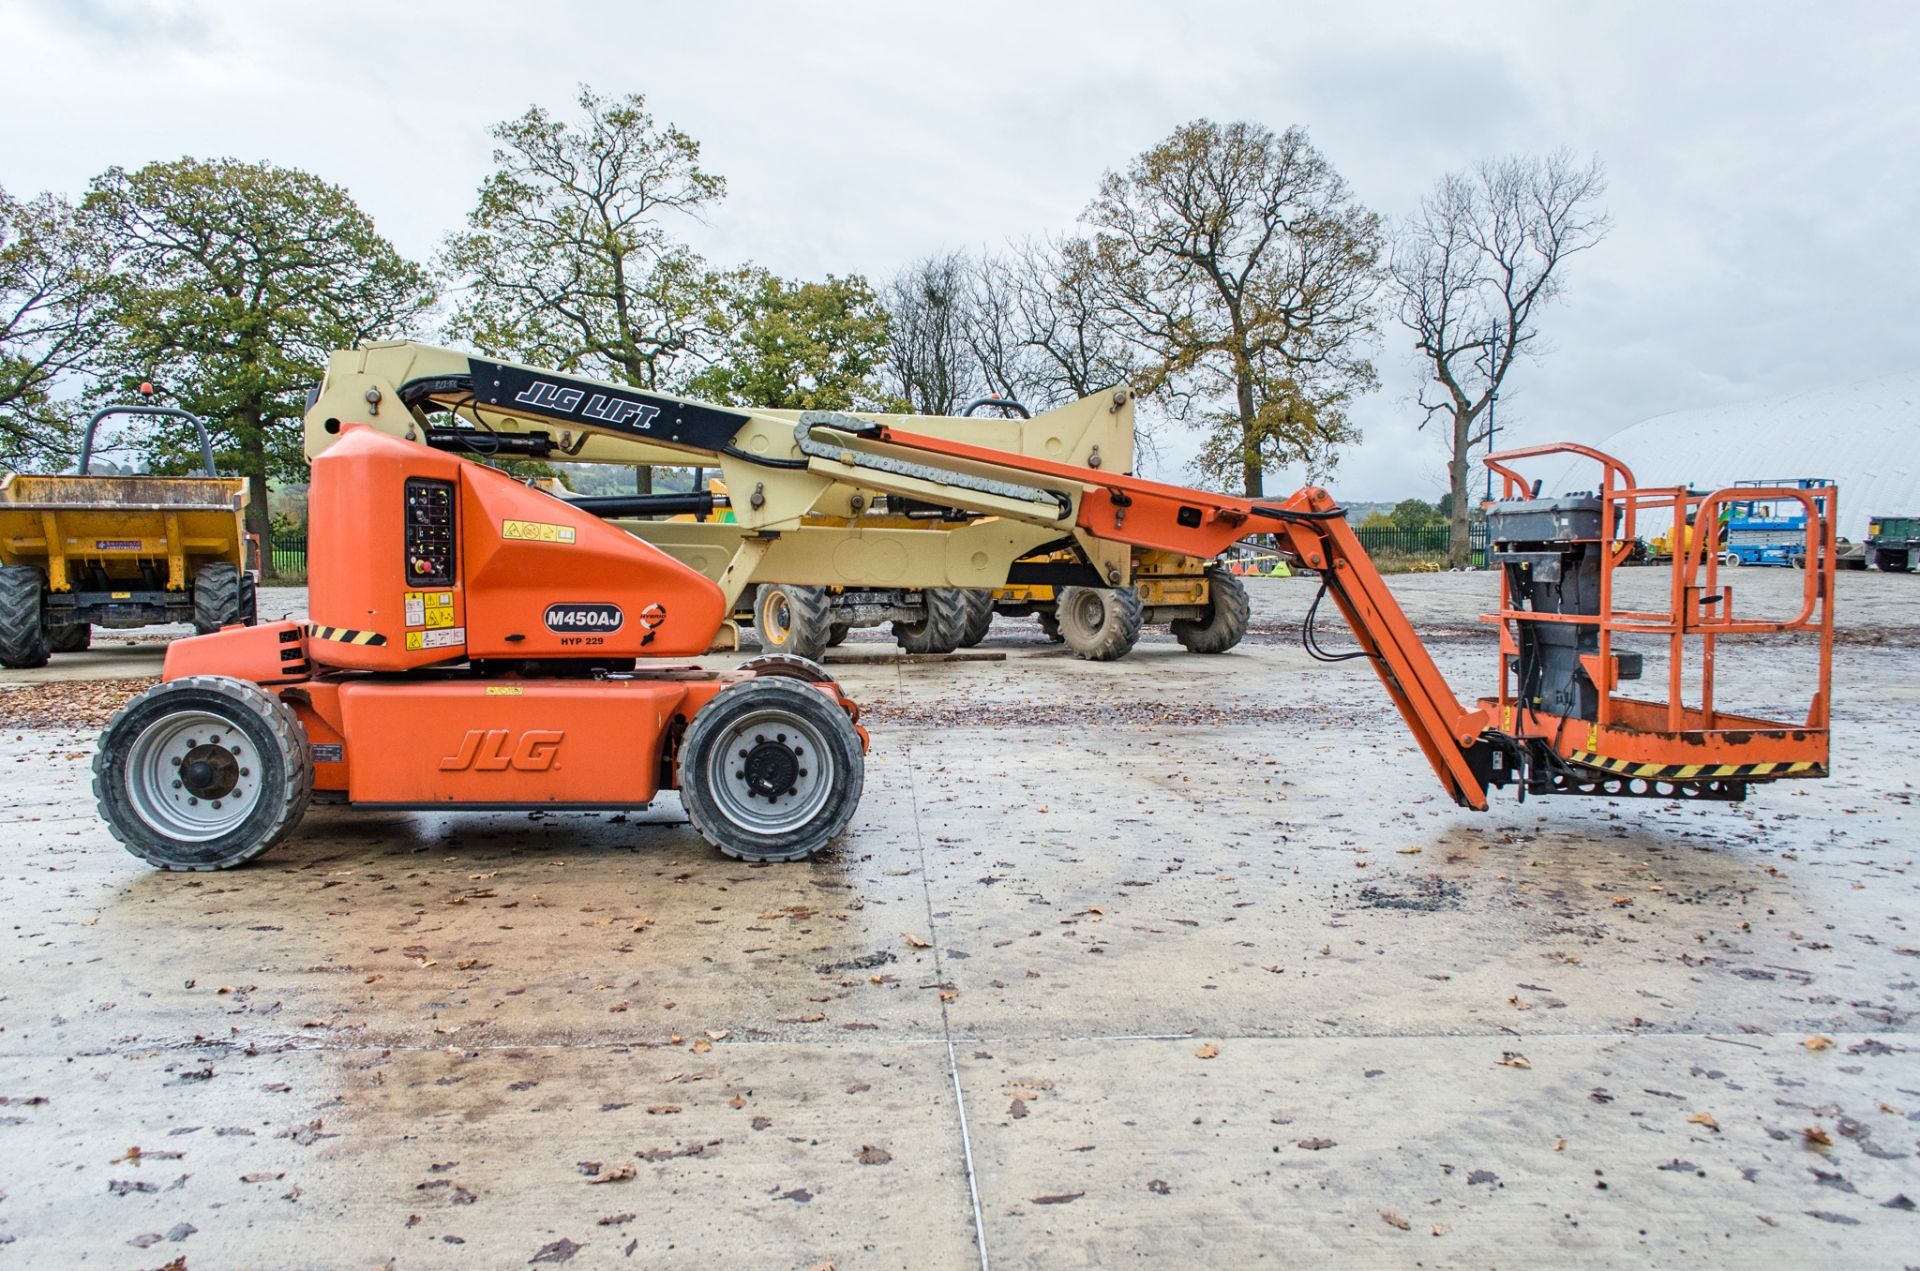 JLG M450AJ hybrid articulated boom lift Year: 2012 S/N: 156095 Recorded hours: 8 (Suspect clock - Image 7 of 17